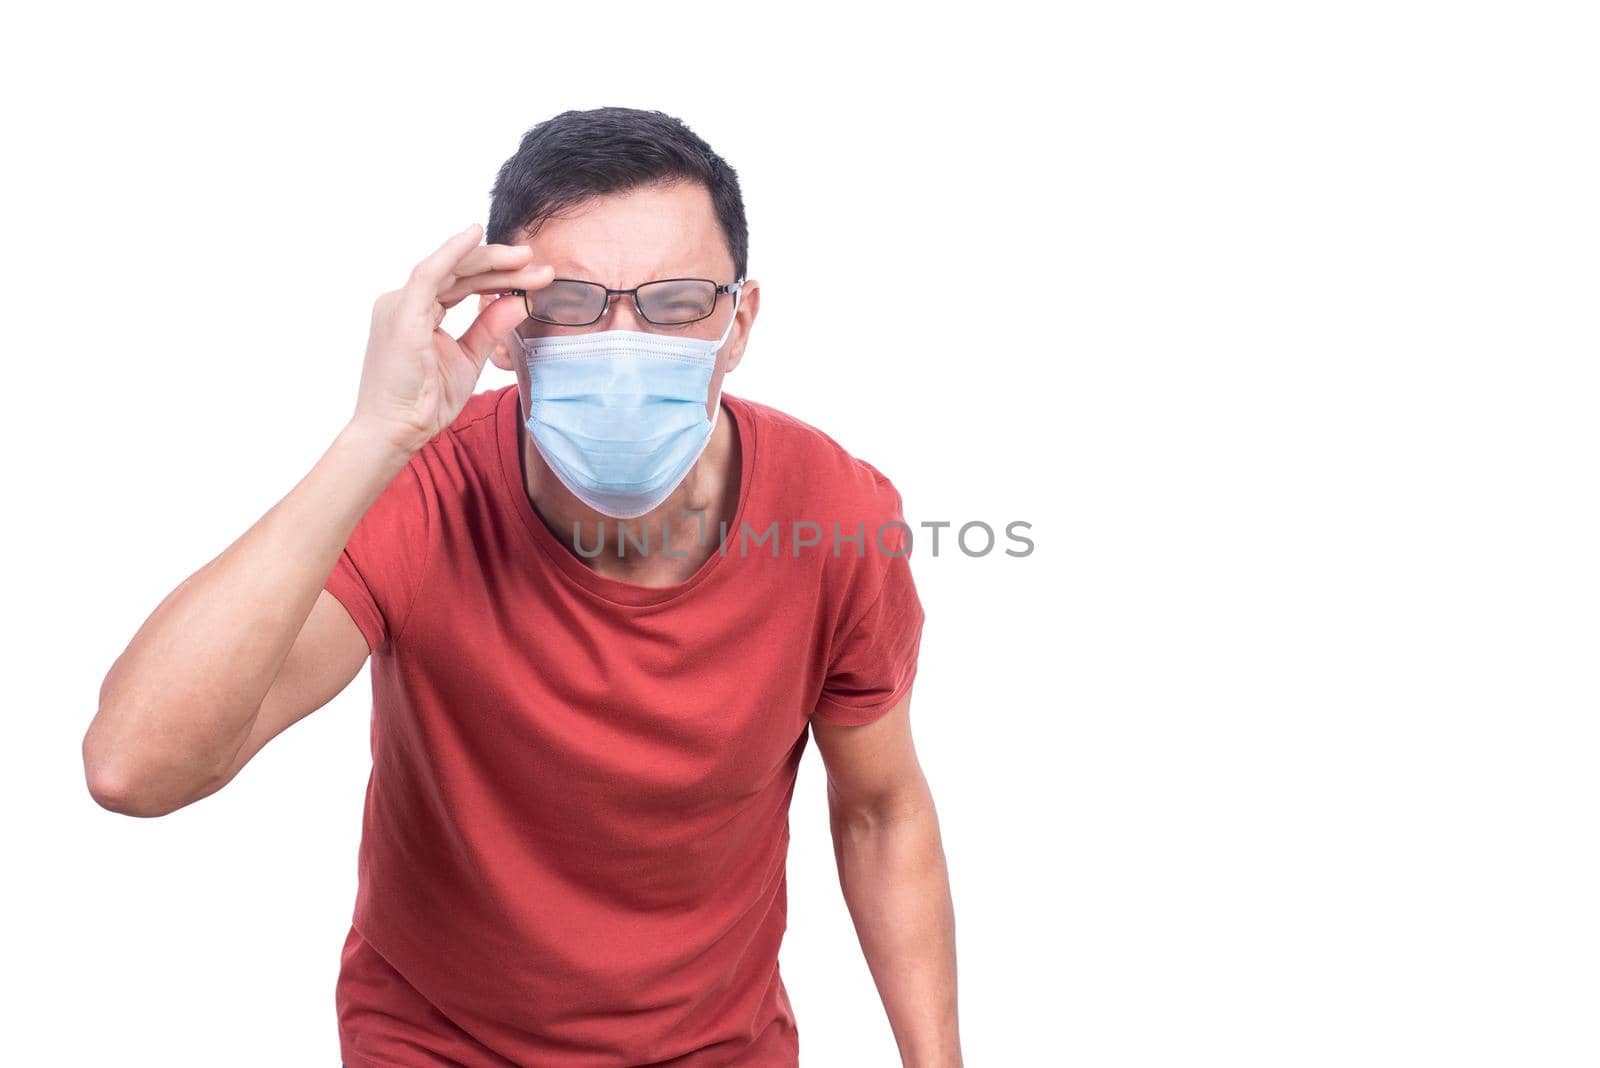 Male in protective mask looking at camera through fogged up eyeglasses while standing isolated on white background during coronavirus pandemic